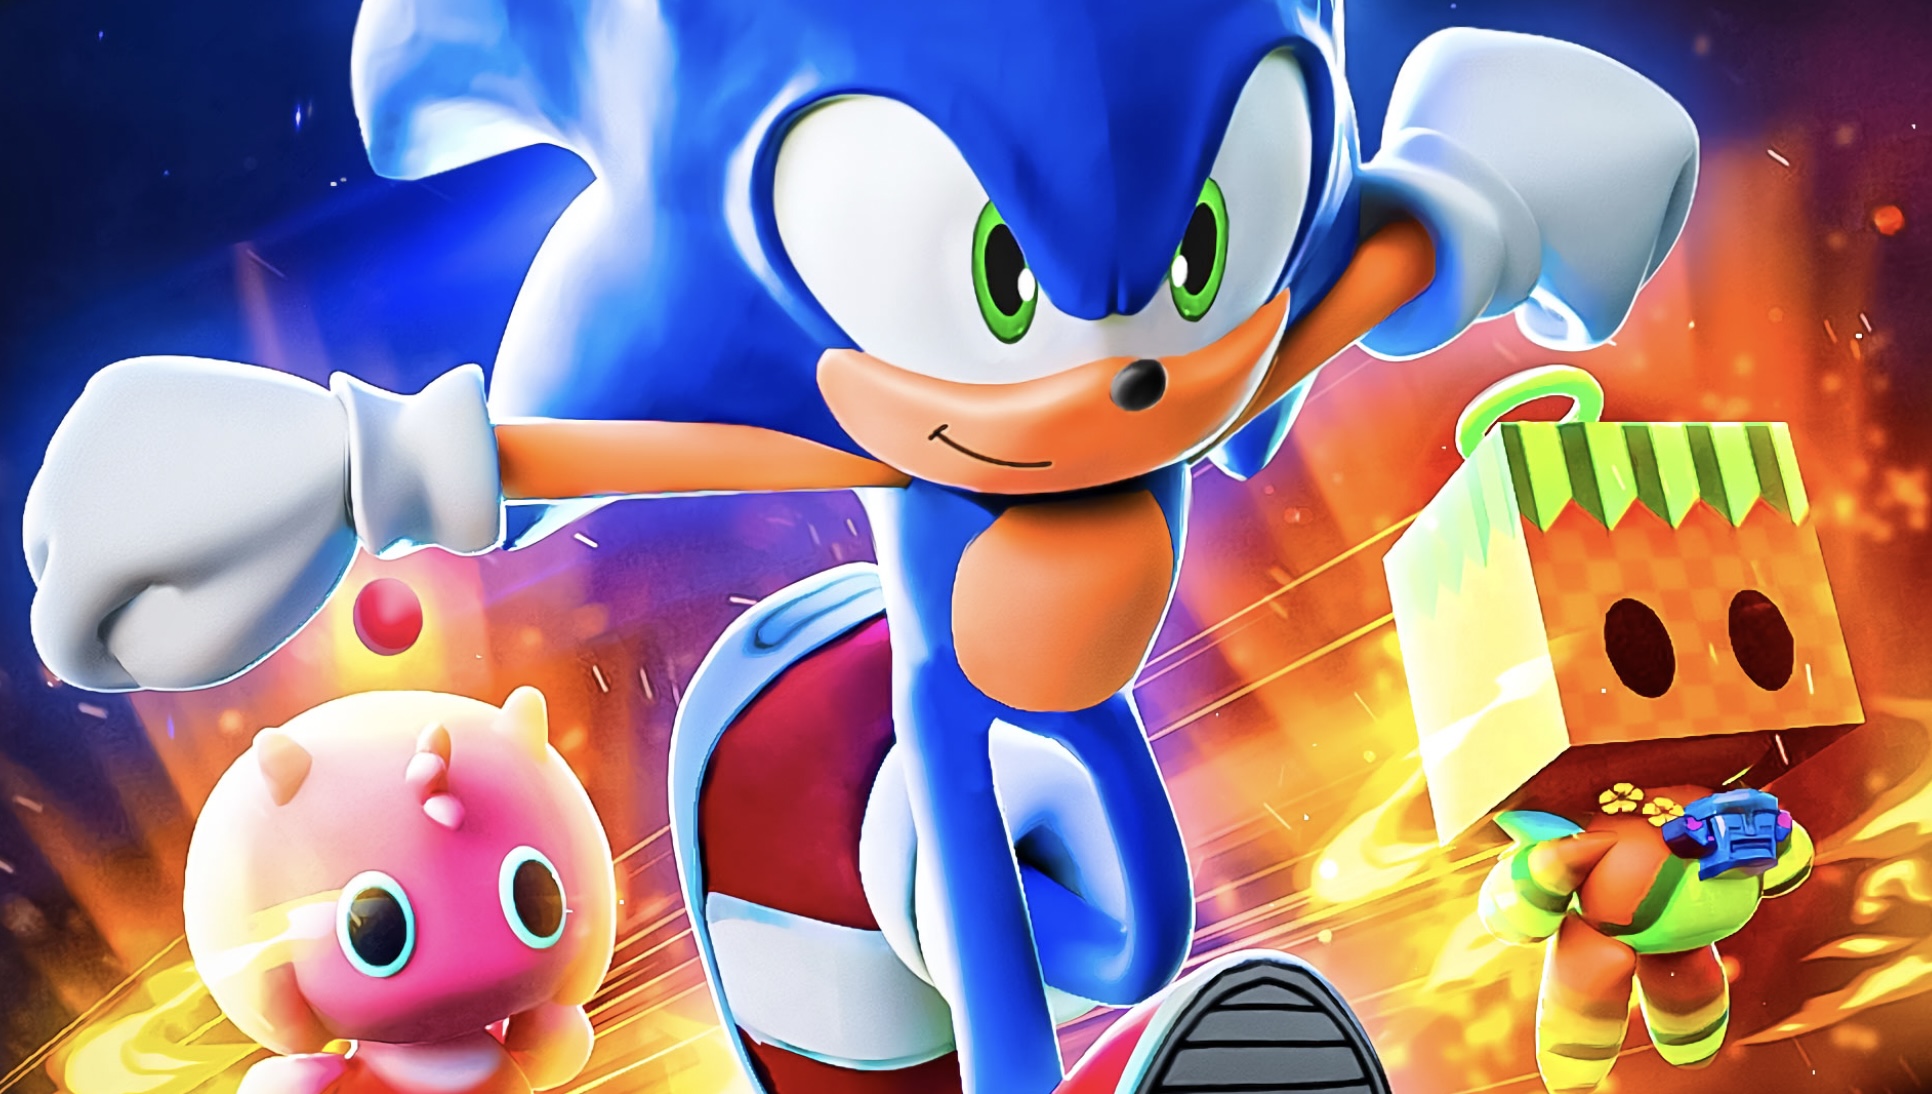 sonic-speed-simulator-codes-free-skins-and-more-pocket-tactics